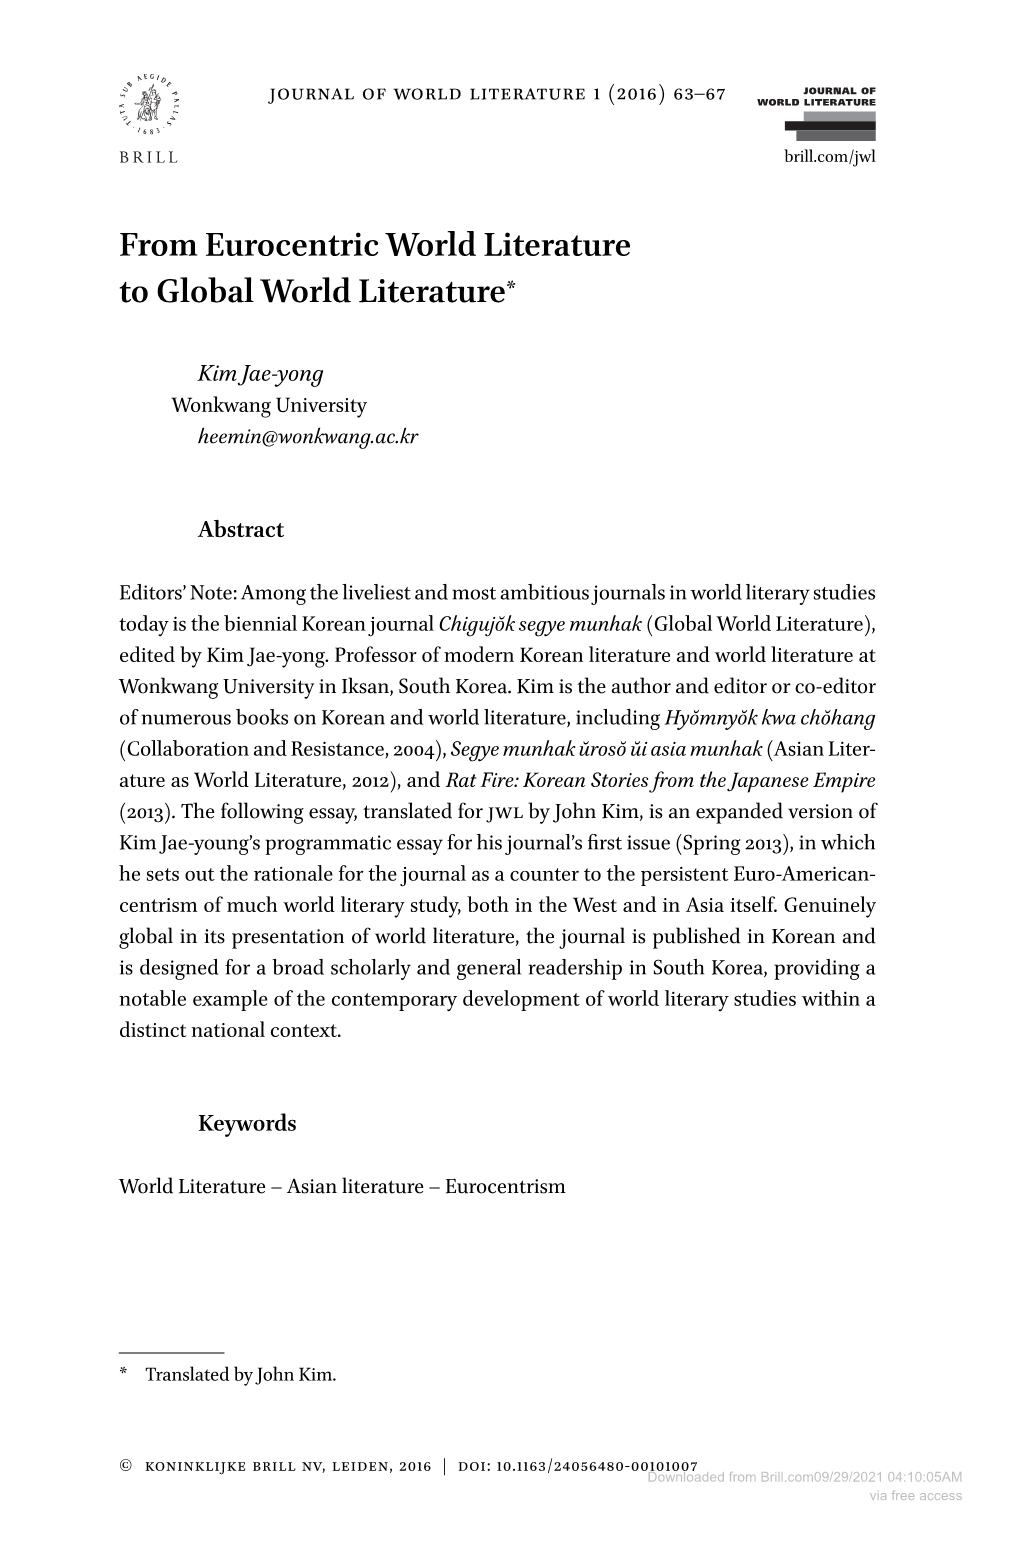 From Eurocentric World Literature to Global World Literature*